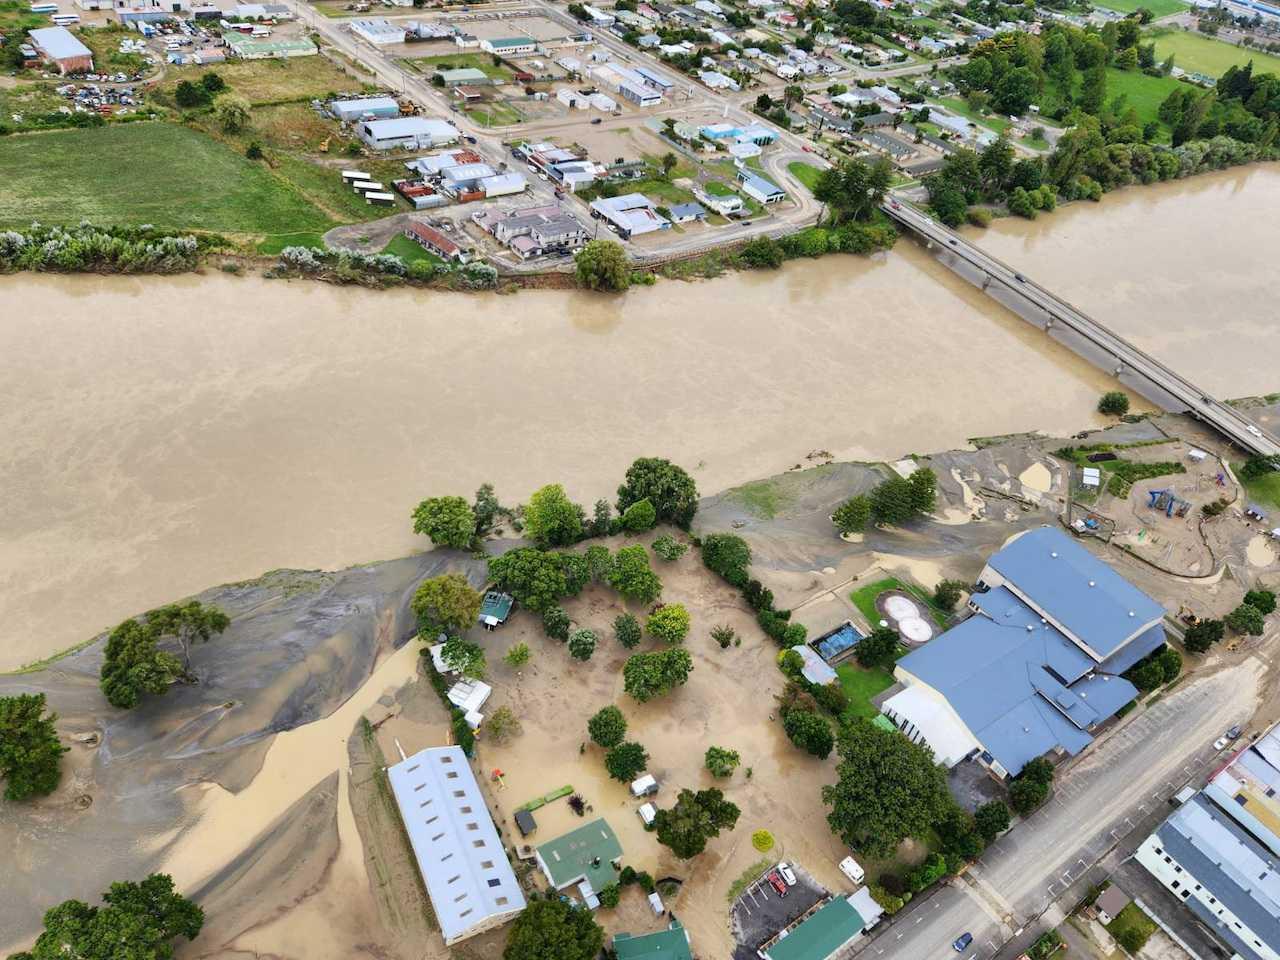 A view of flood damage in the the aftermath of Cyclone Gabrielle in Hawke's Bay, New Zealand, in this picture released on Feb 15. Photo: Reuters